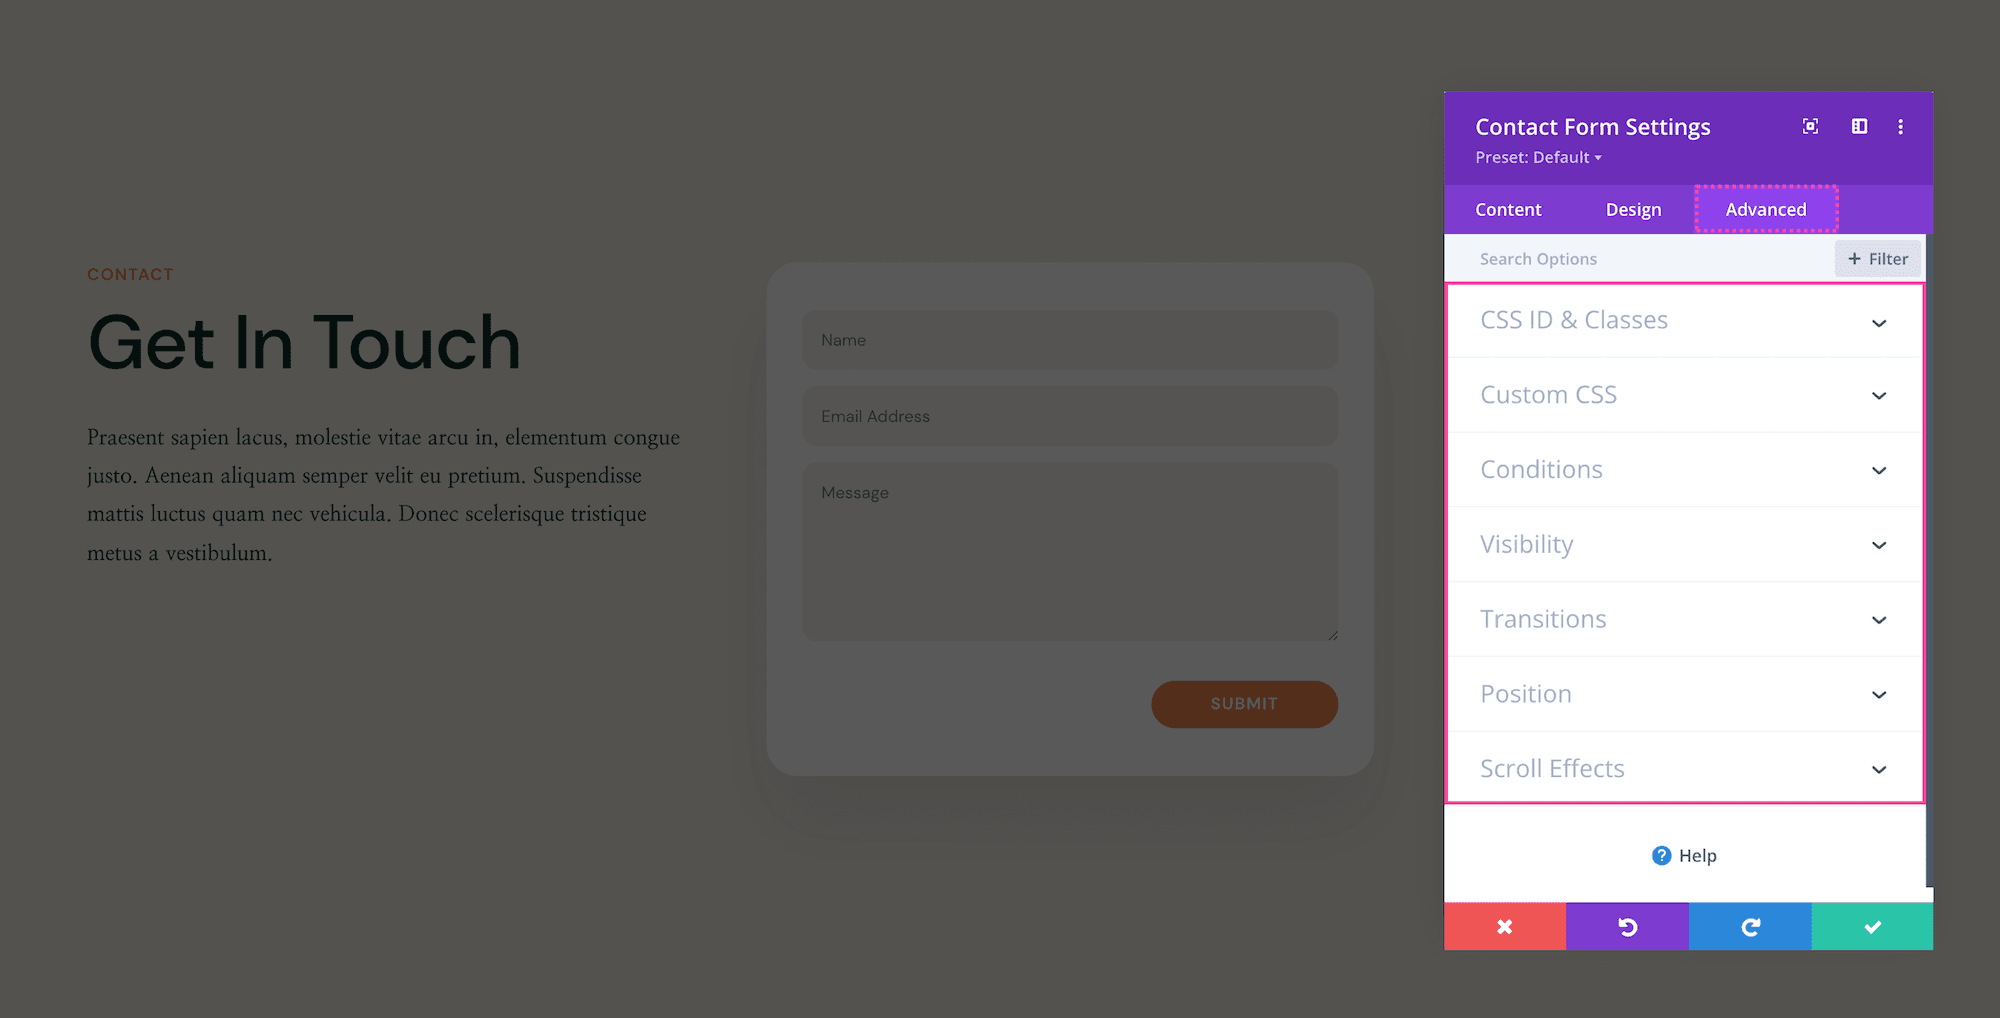 How to use the Divi Contact Form Module